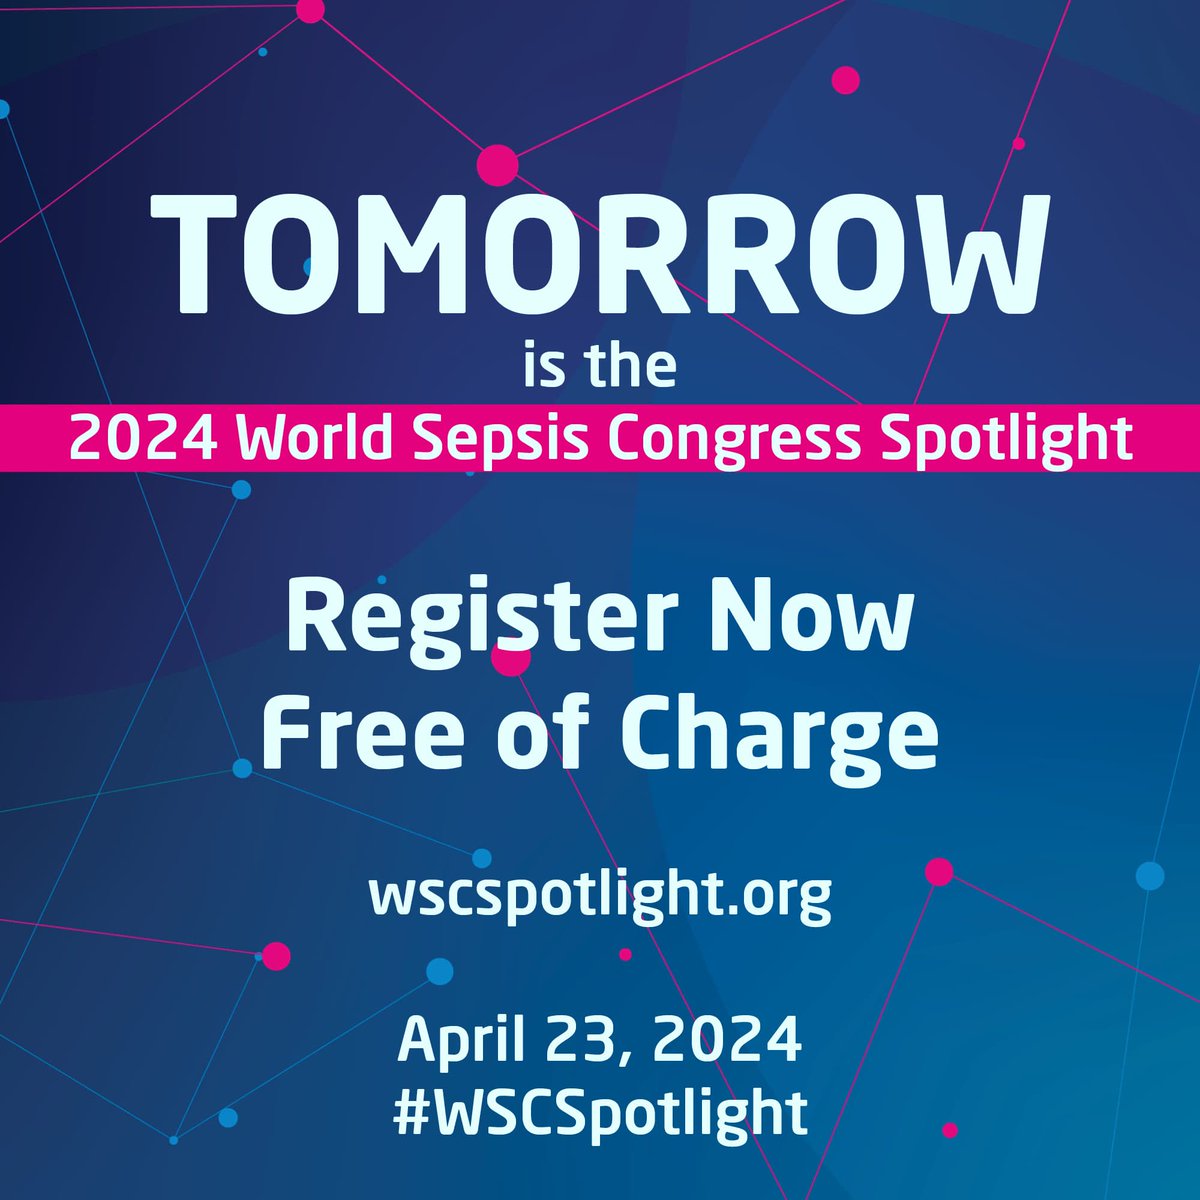 Join the 2024 #WSCSpotlight on April 23 – 45 speakers from all parts of the world will present on many aspects of #sepsis, incl. #AMR, #patientsafety, and much more. More info, all speakers, program, and free registration at wscspotlight.org